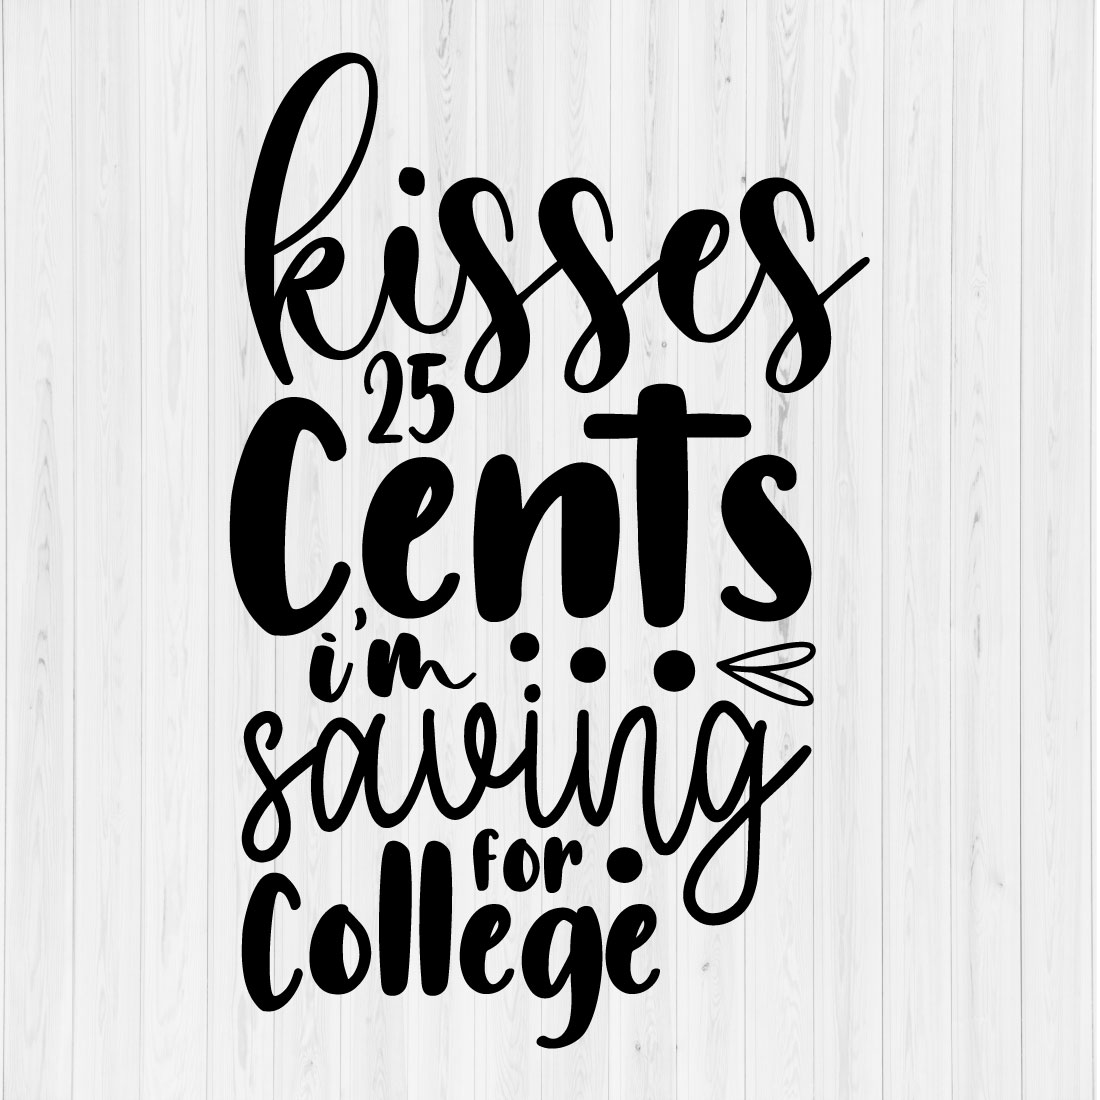 kisses 25 cents i'm saving for college preview image.